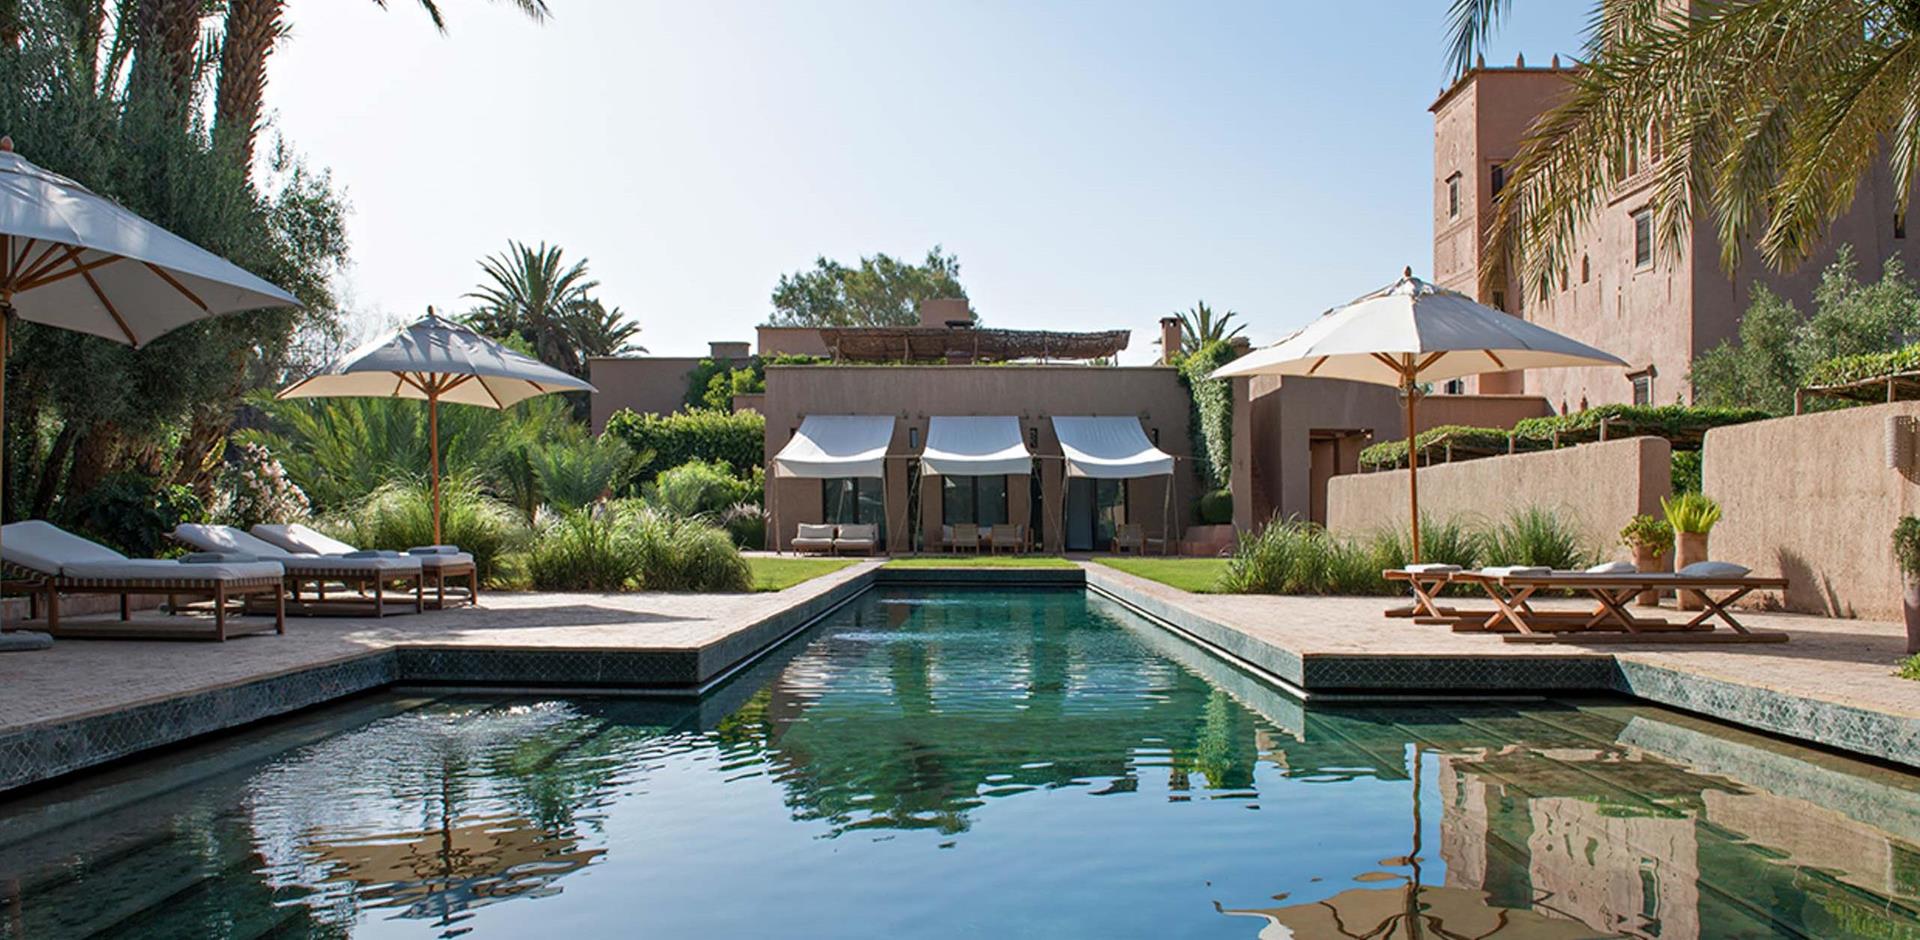 Pool and exterior, Dar Ahlam, Morocco